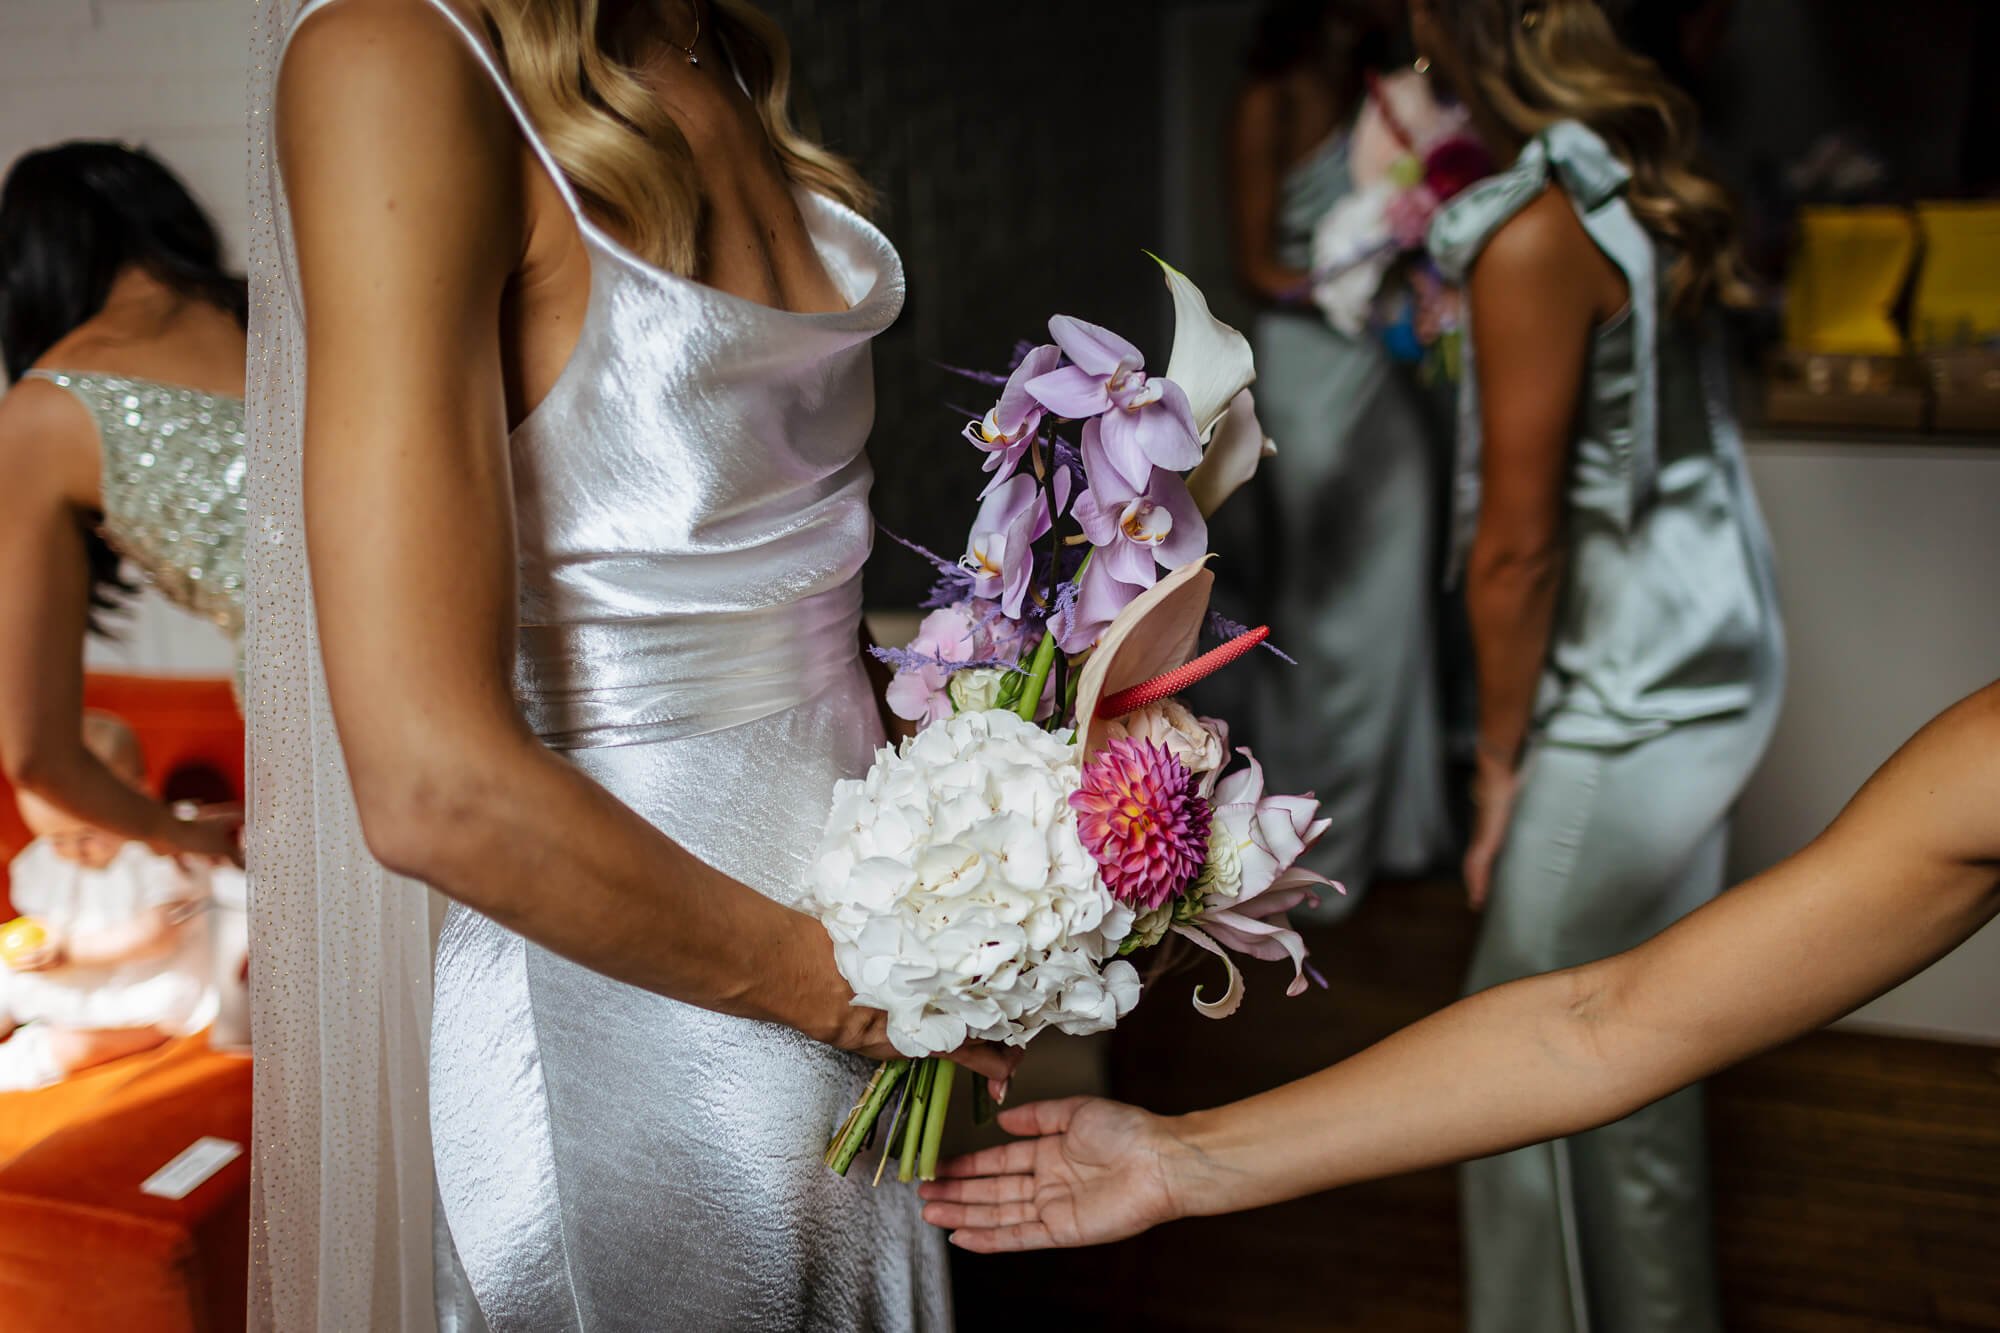 A beautiful wedding bouquet held by the bride